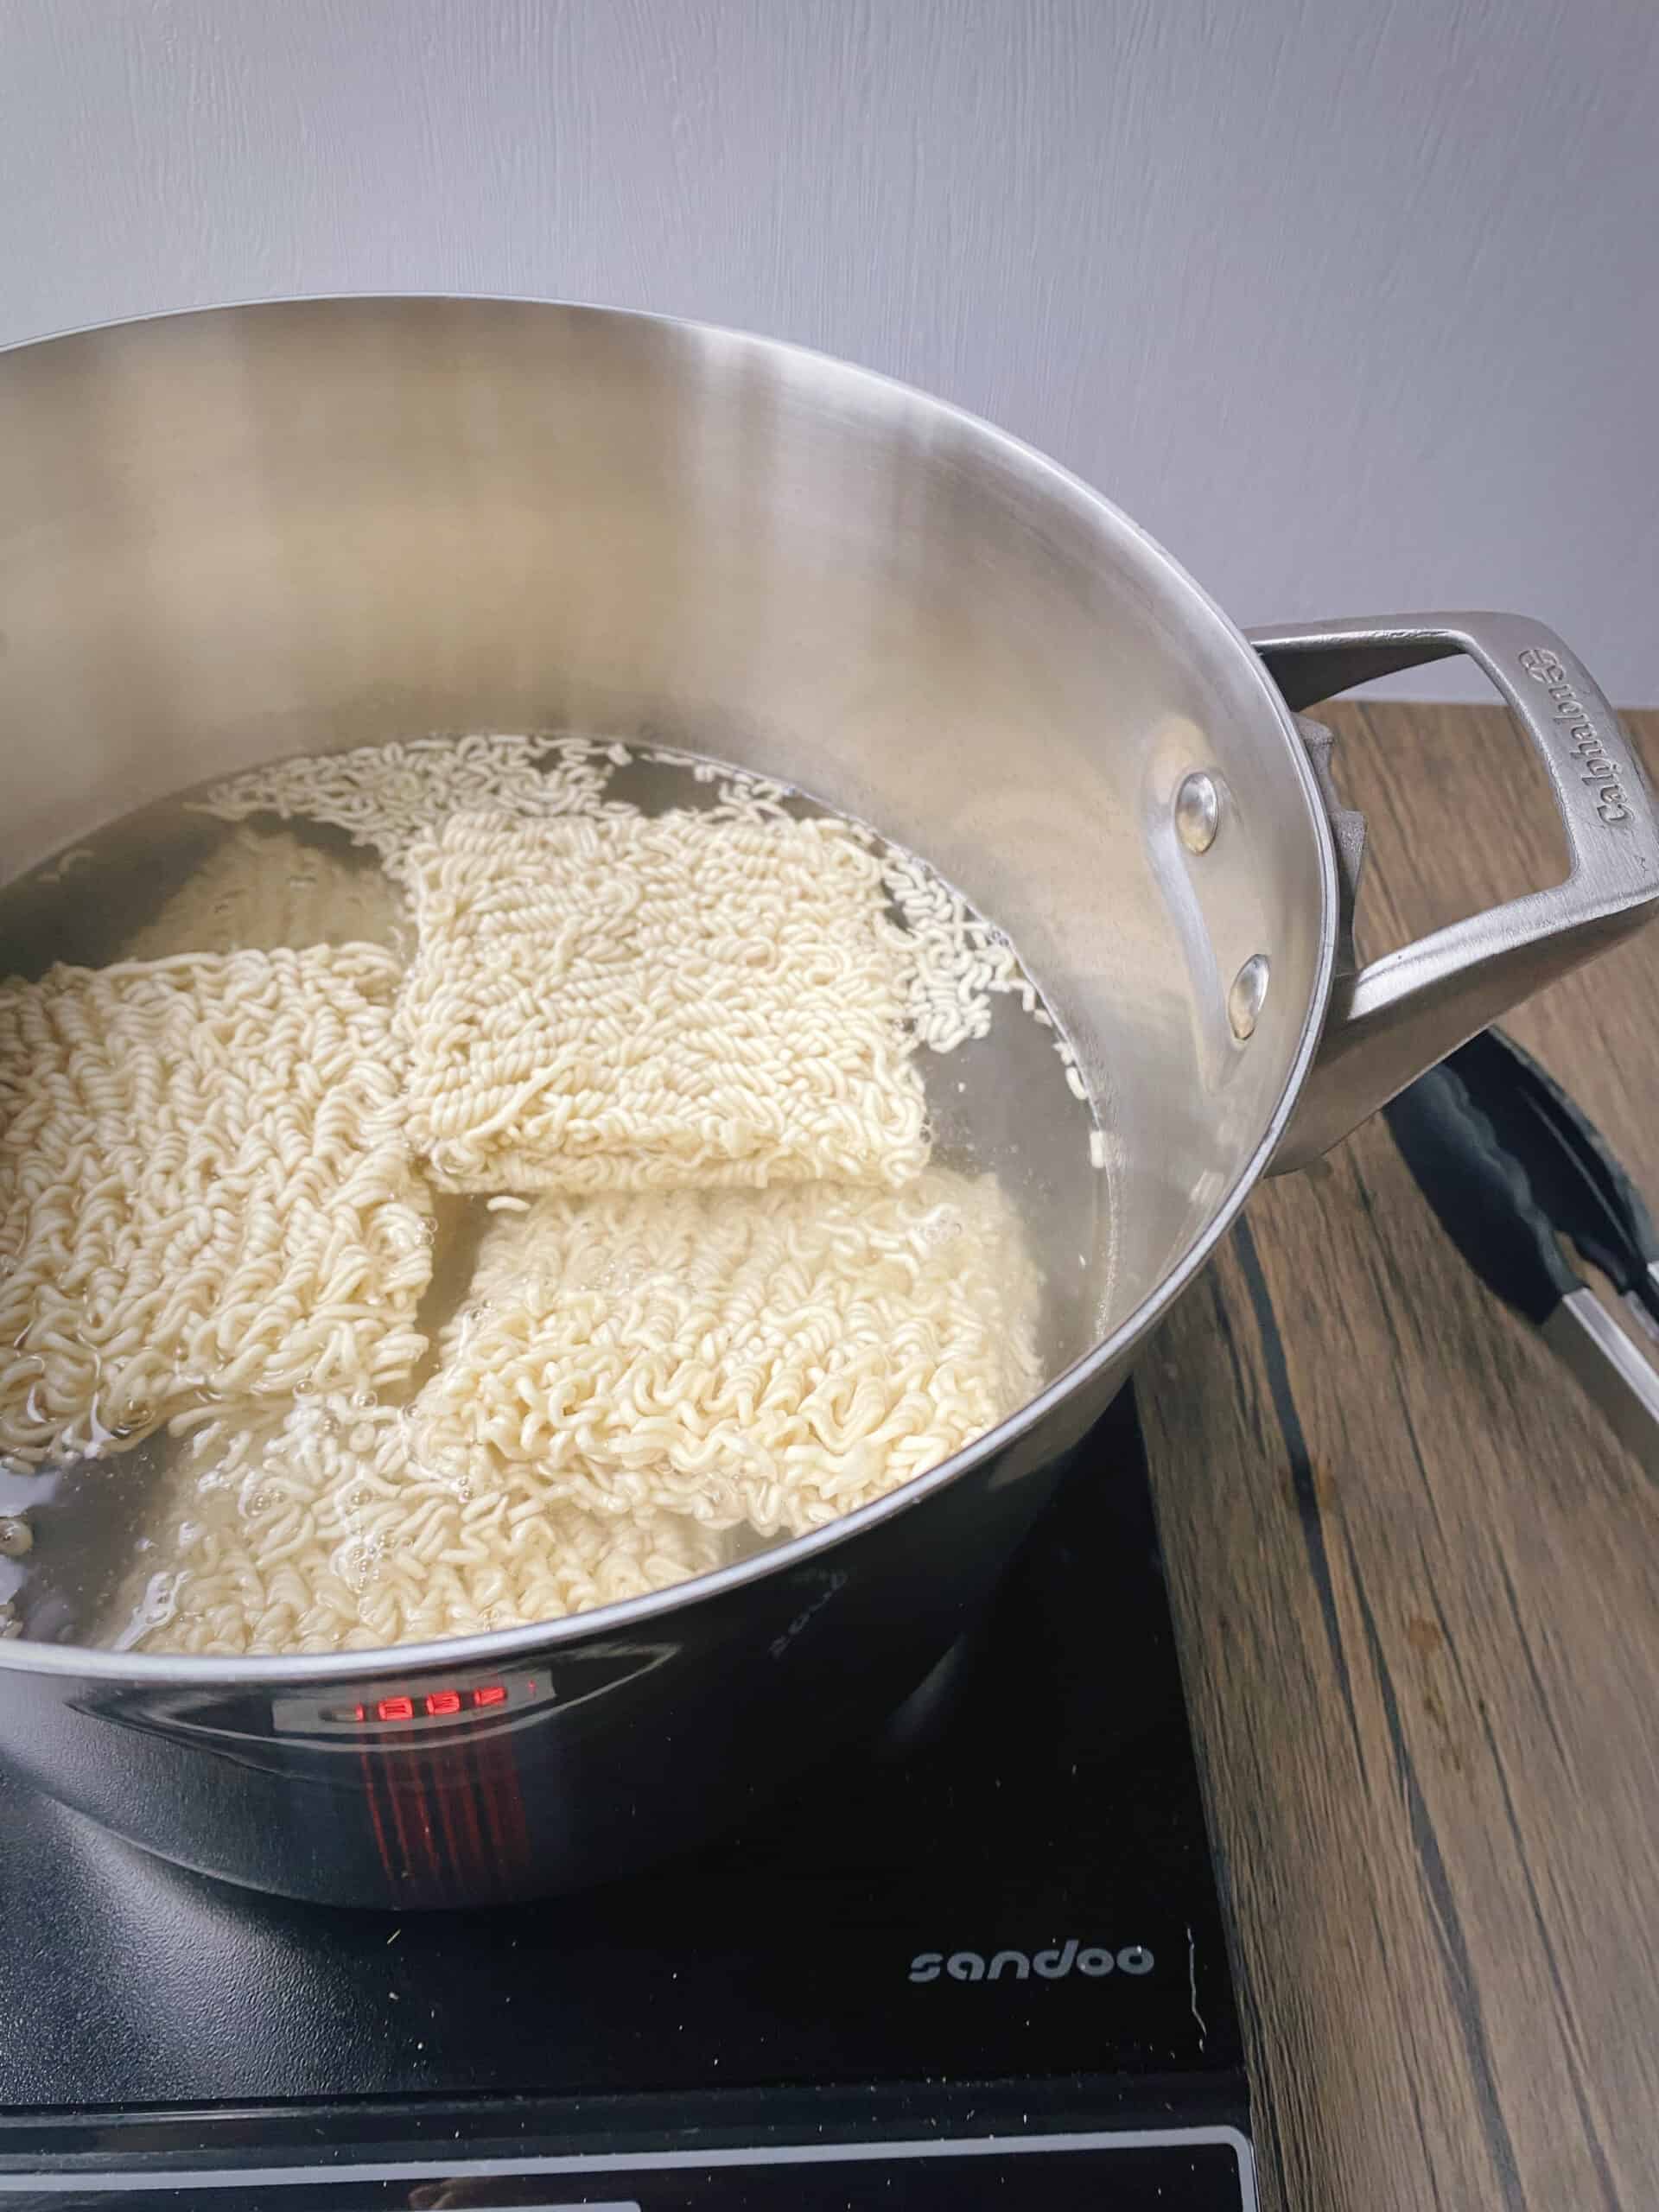 squares of ramen noodles after adding to boiling water.